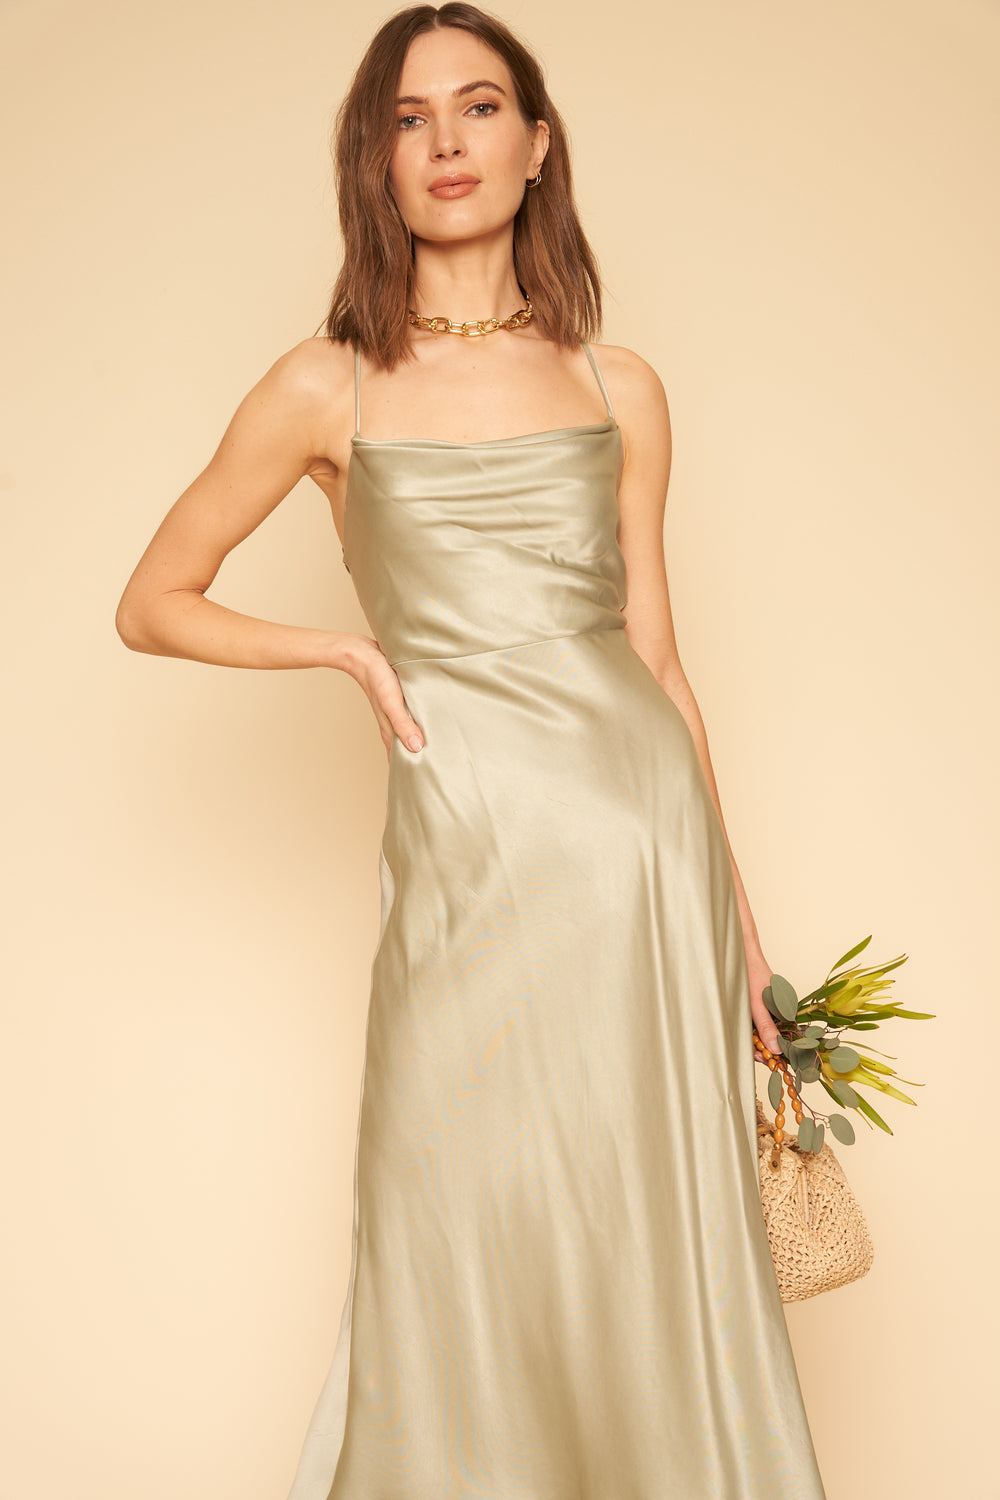 Camille Dress in Sage - Whimsy & Row